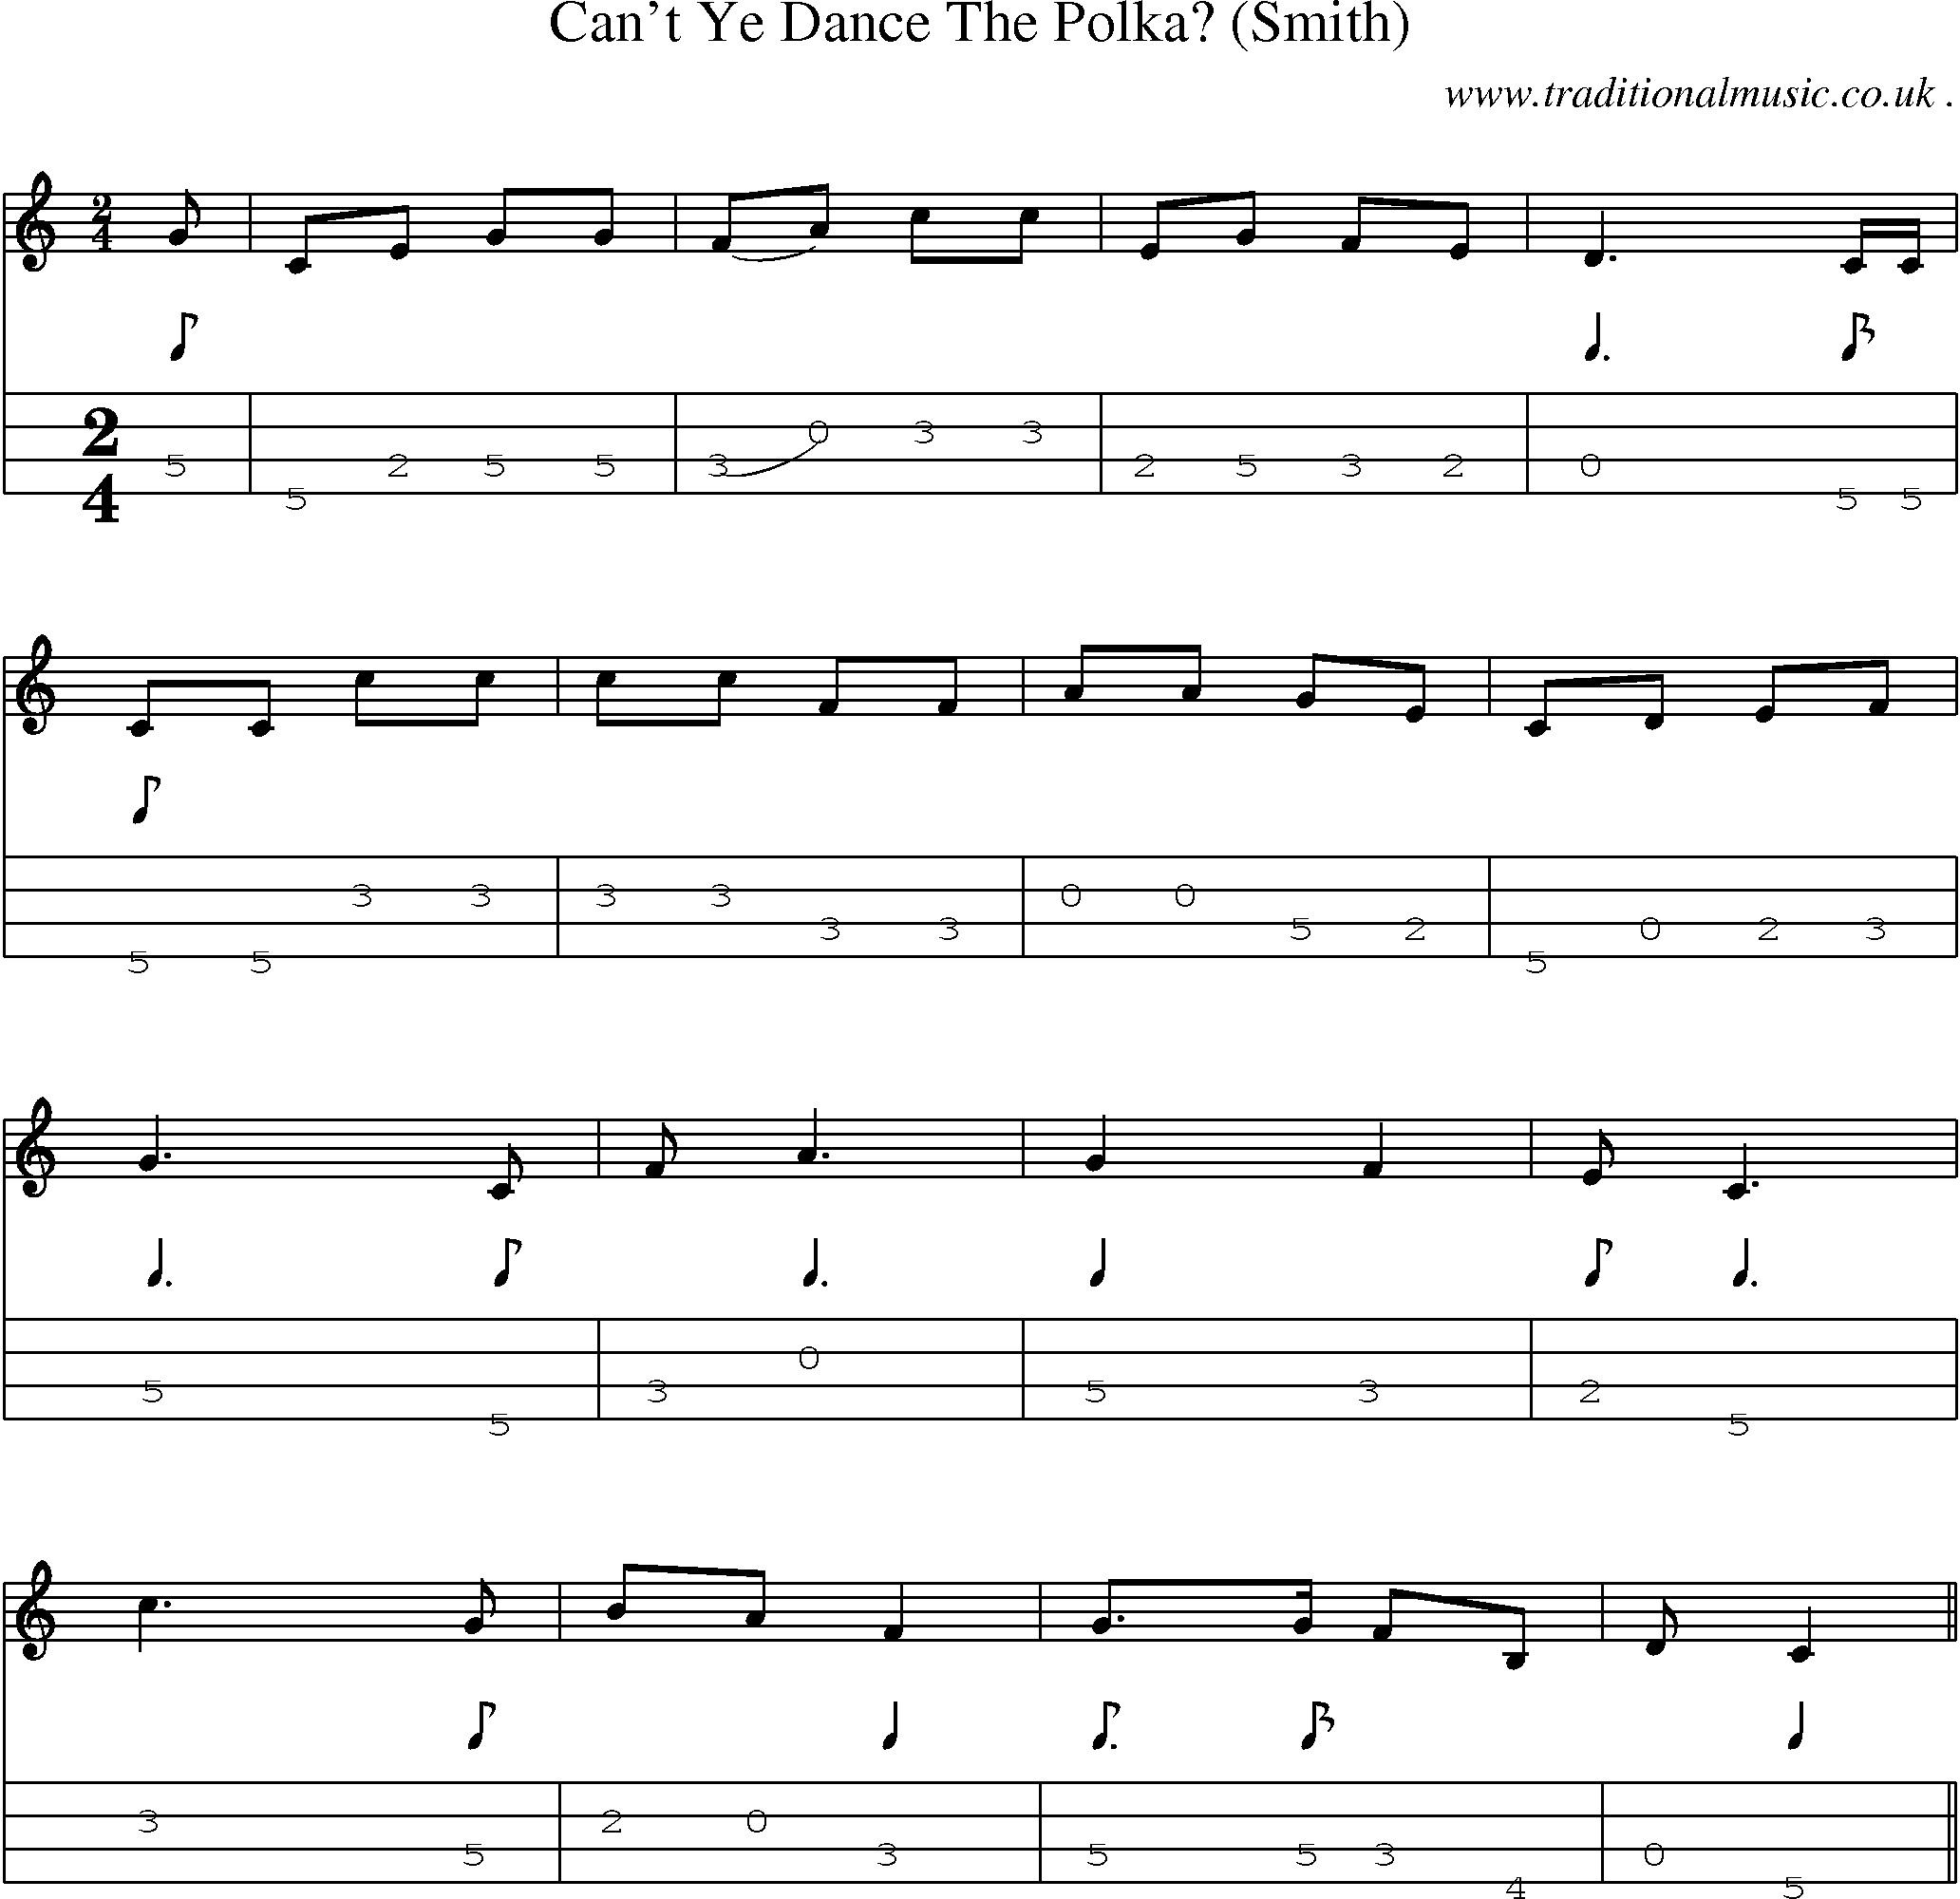 Sheet-Music and Mandolin Tabs for Cant Ye Dance The Polka (smith)